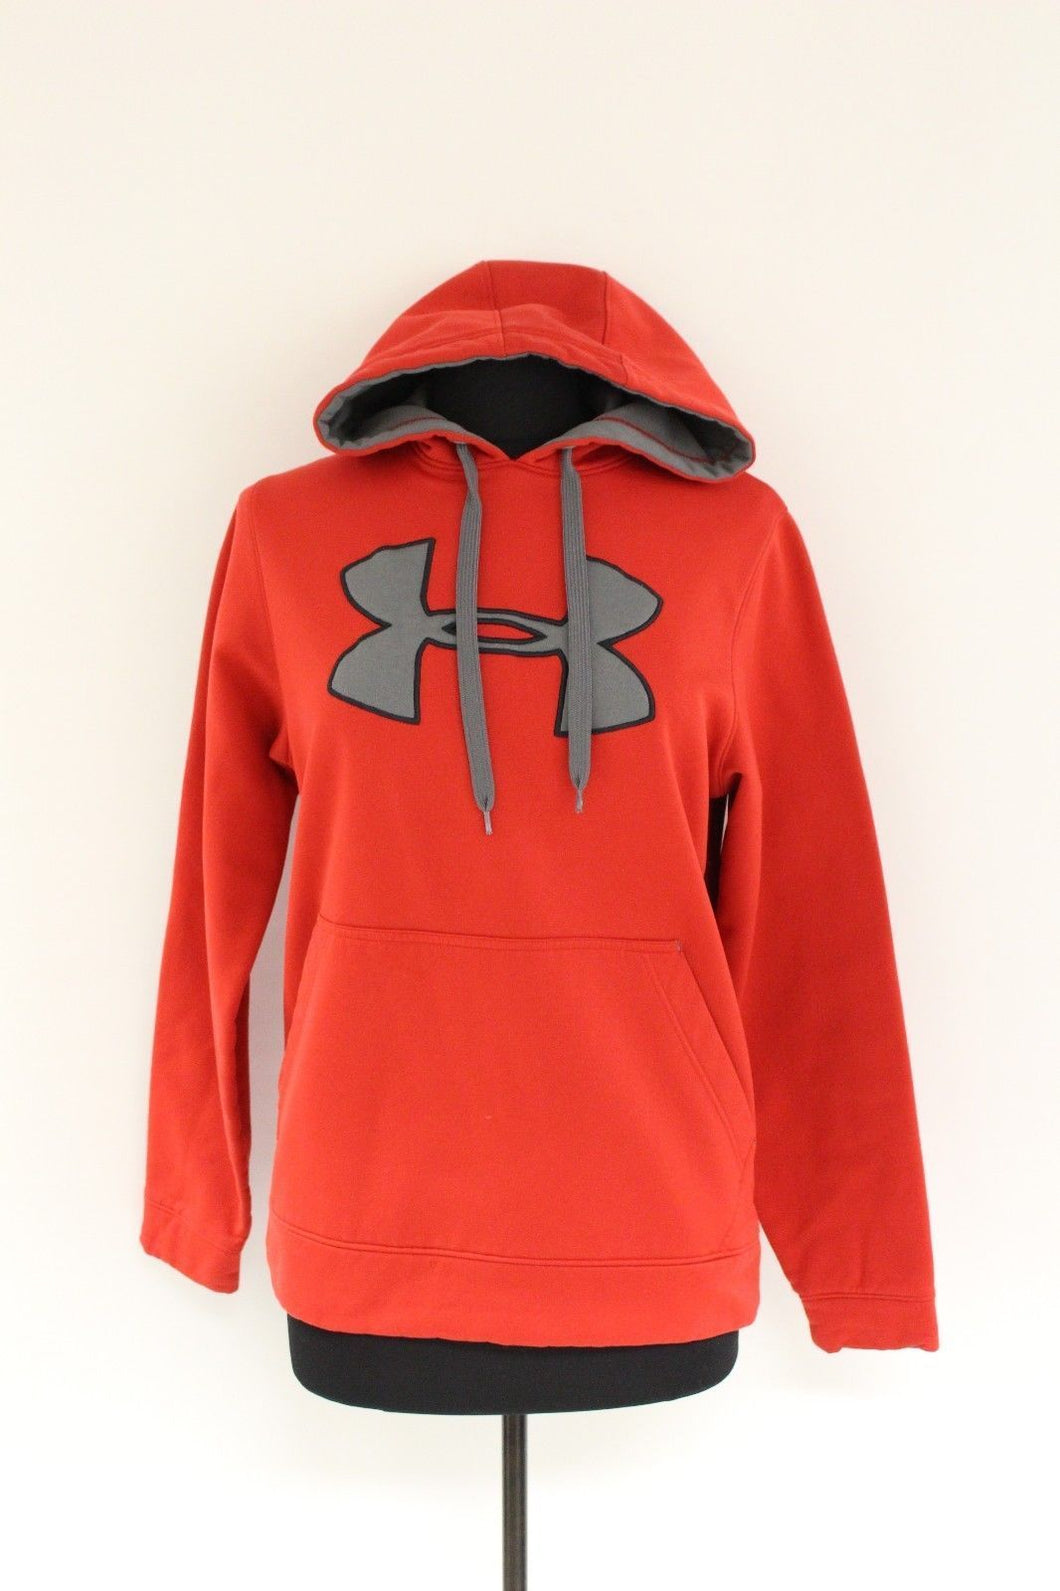 Under Armour Hoodie, Red, Small